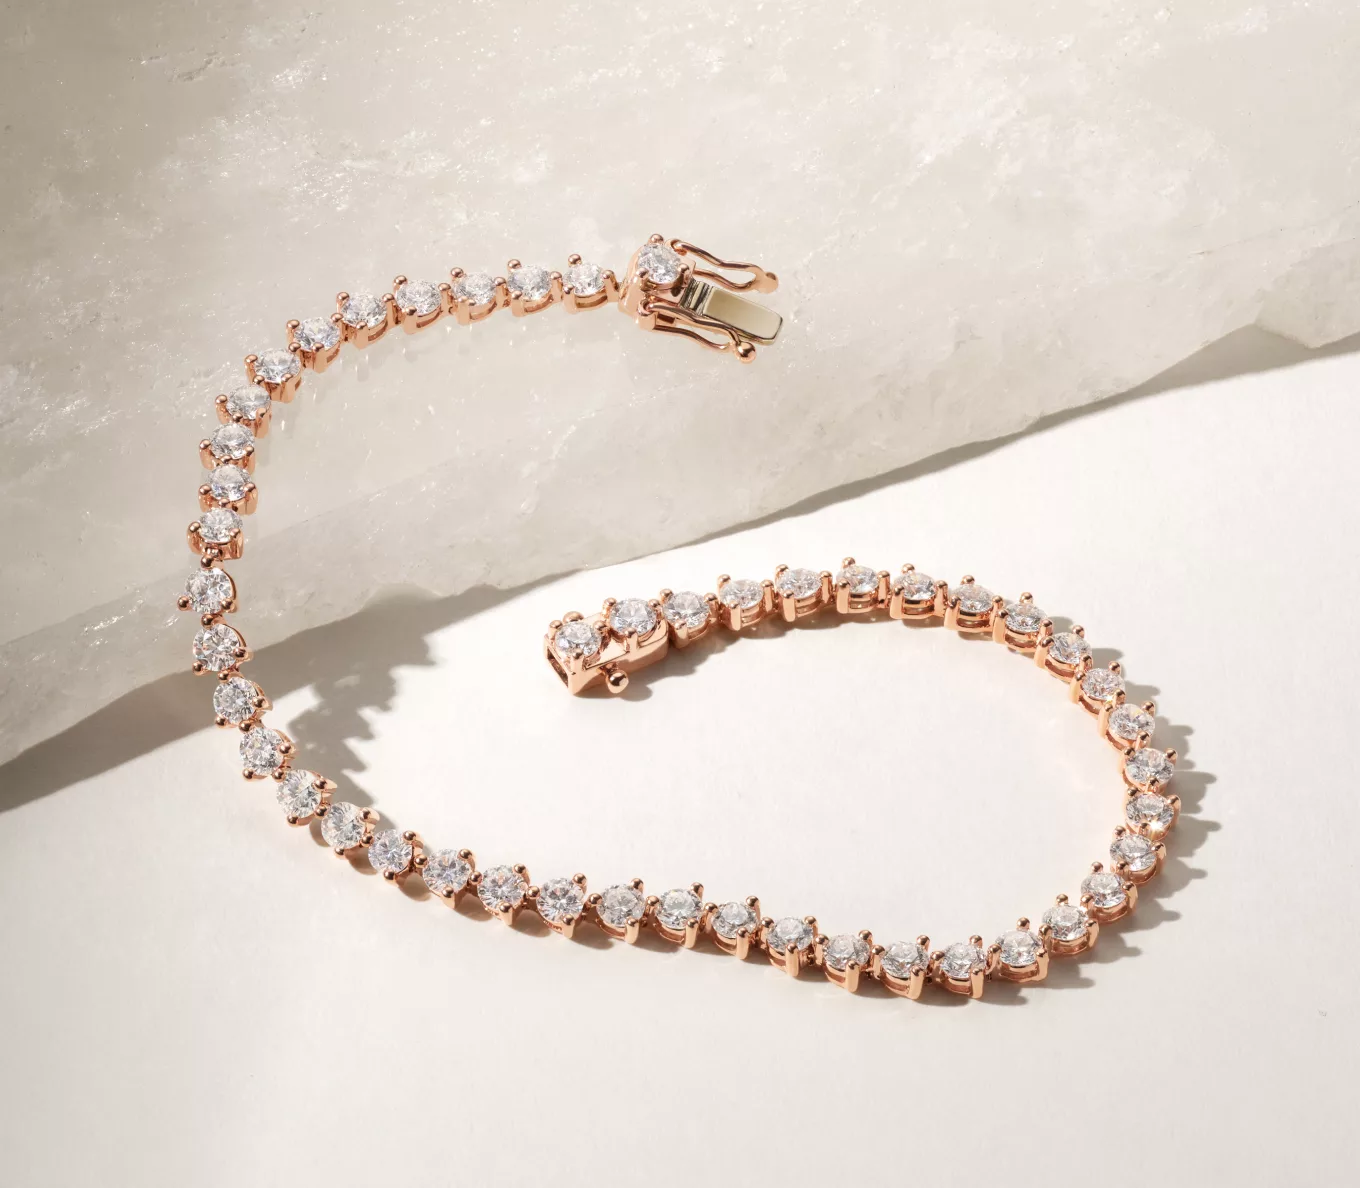 jewelry gifts over $5000: rose gold tennis bracelet. 5 ct. Diamond Tennis Bracelet (7 in) Put the spotlight on the sparkle and fire of hand-matched natural diamonds with this stunning three-prong tennis bracelet. Crafted in vivid 14-karat rose gold, it features a secure figure eight clasp.